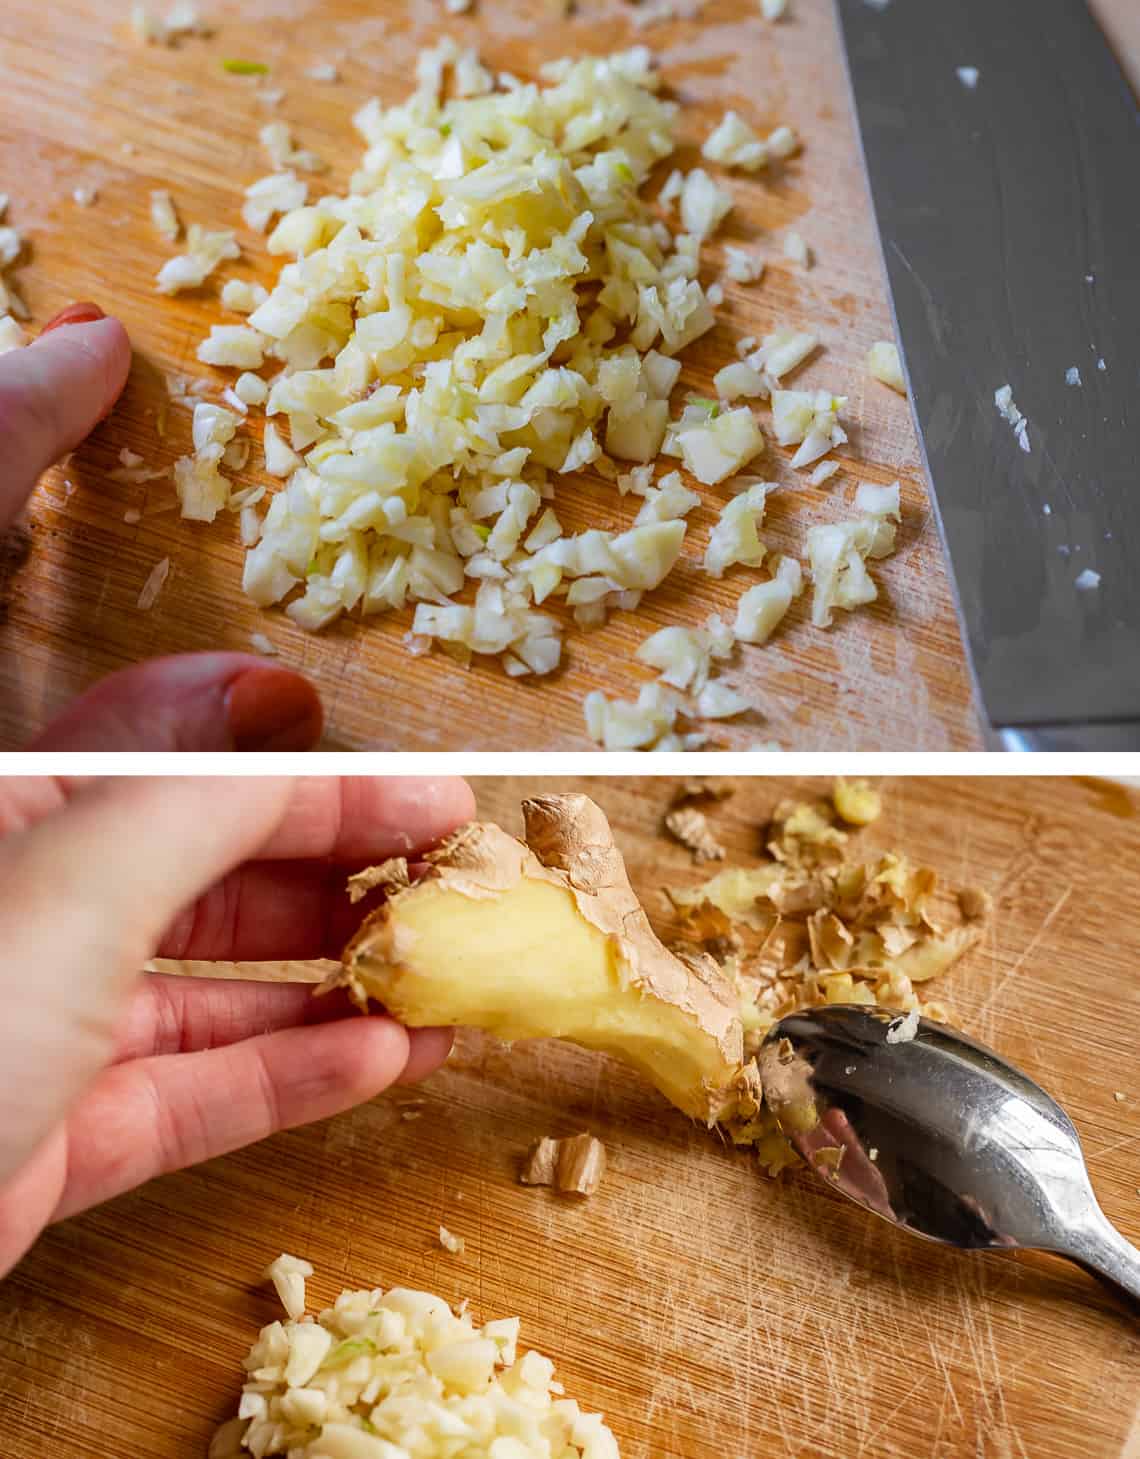 top minced garlic on a wooden chopping board, bottom peeling ginger with a spoon.